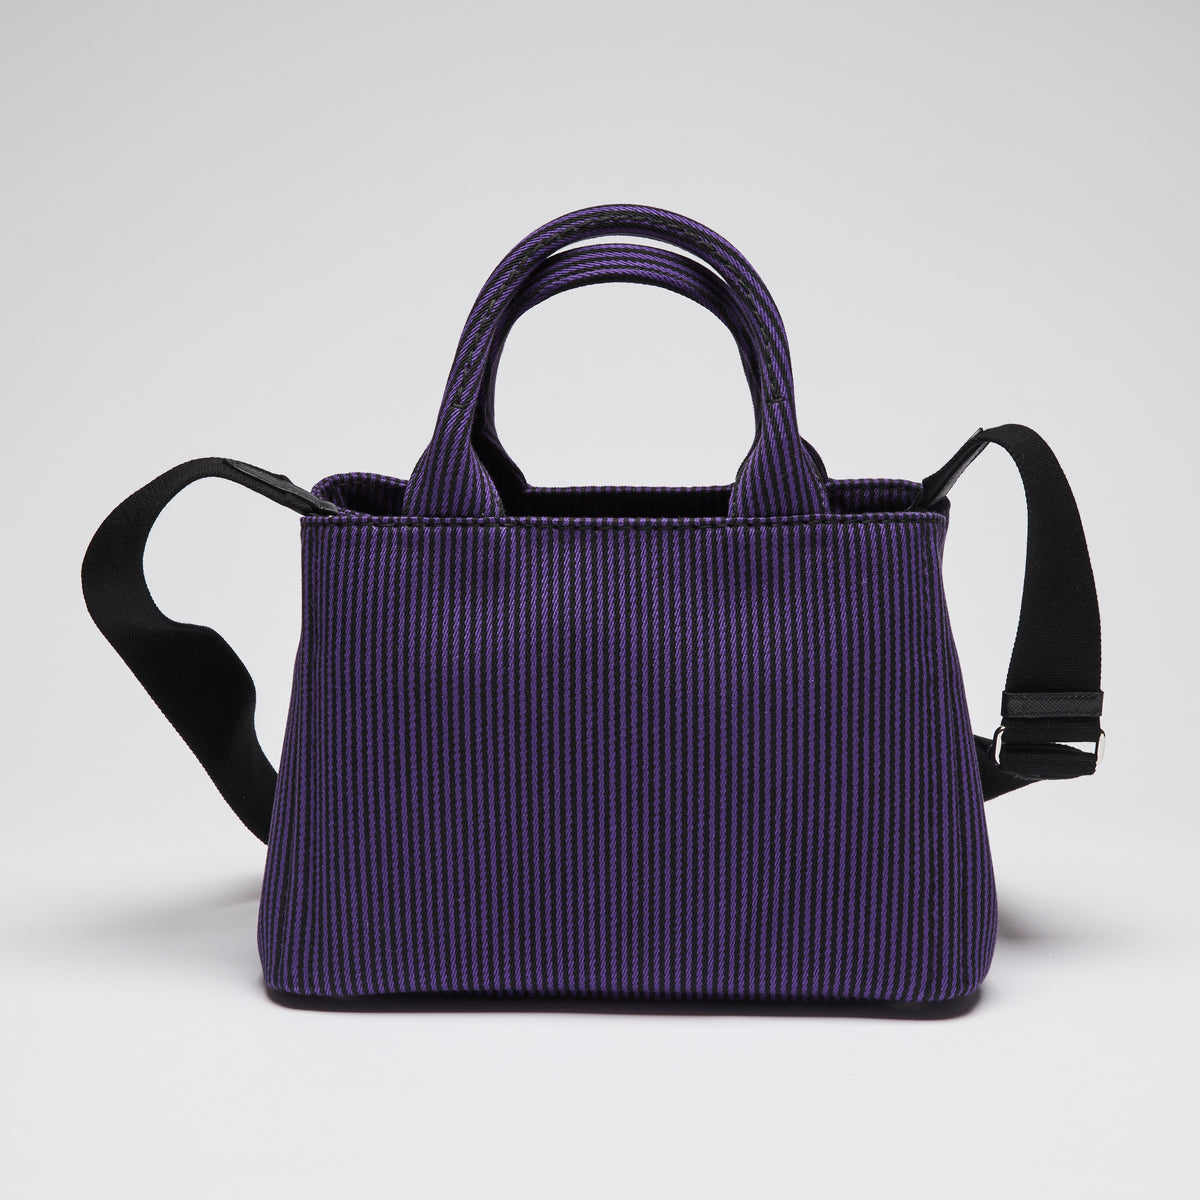 Pre-Loved Purple and Black Pinstriped Top Handle Tote Bag with Removable/Adjustable Shoulder Strap.(back)